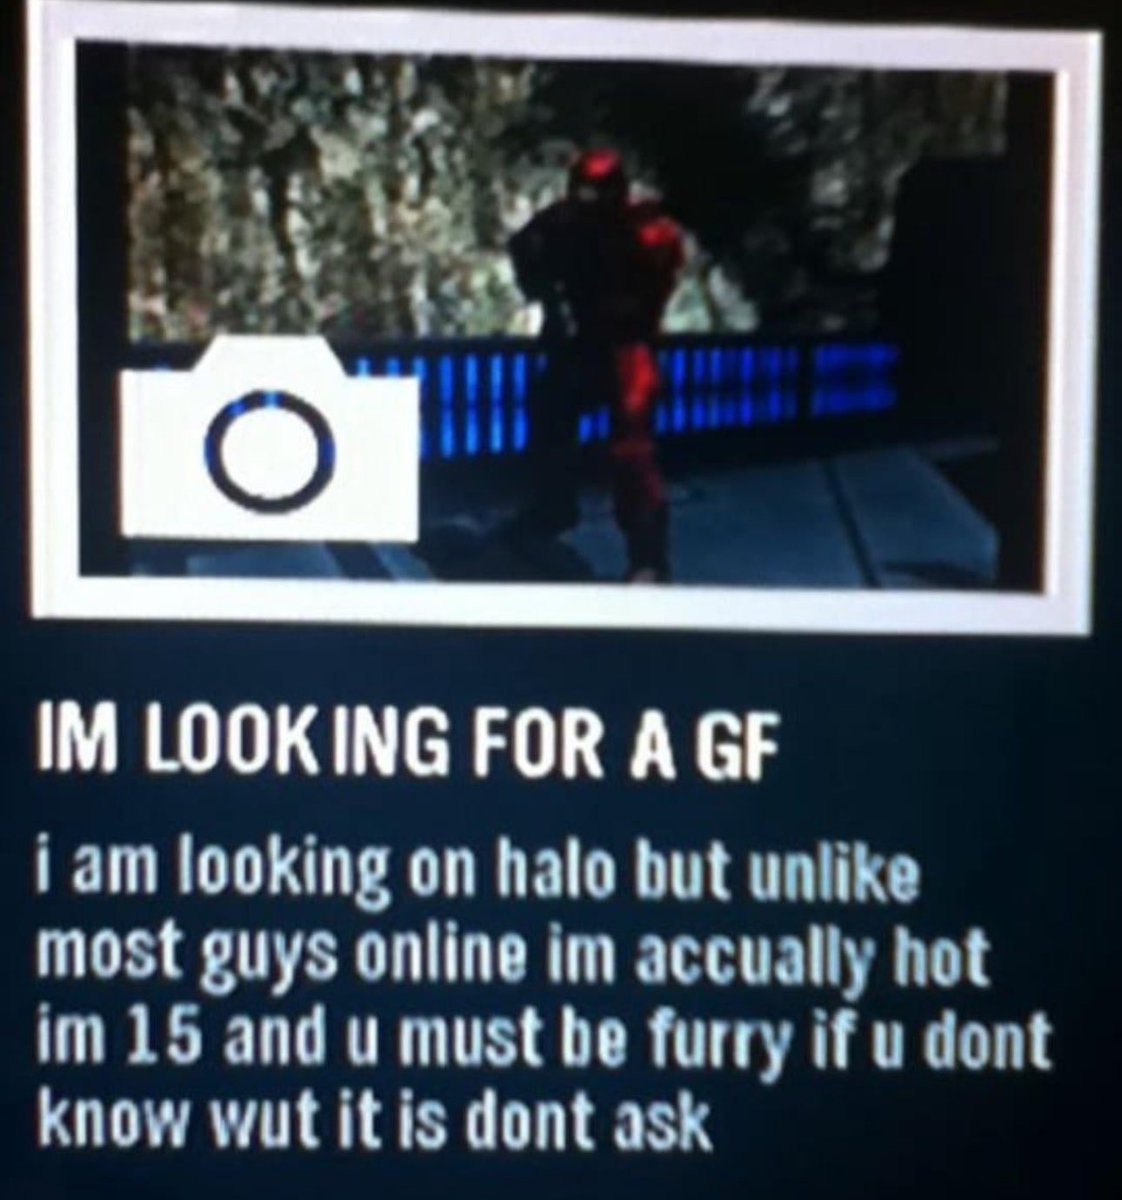 this guy is nearing 30 now. do you think he ever found a halo furry gf